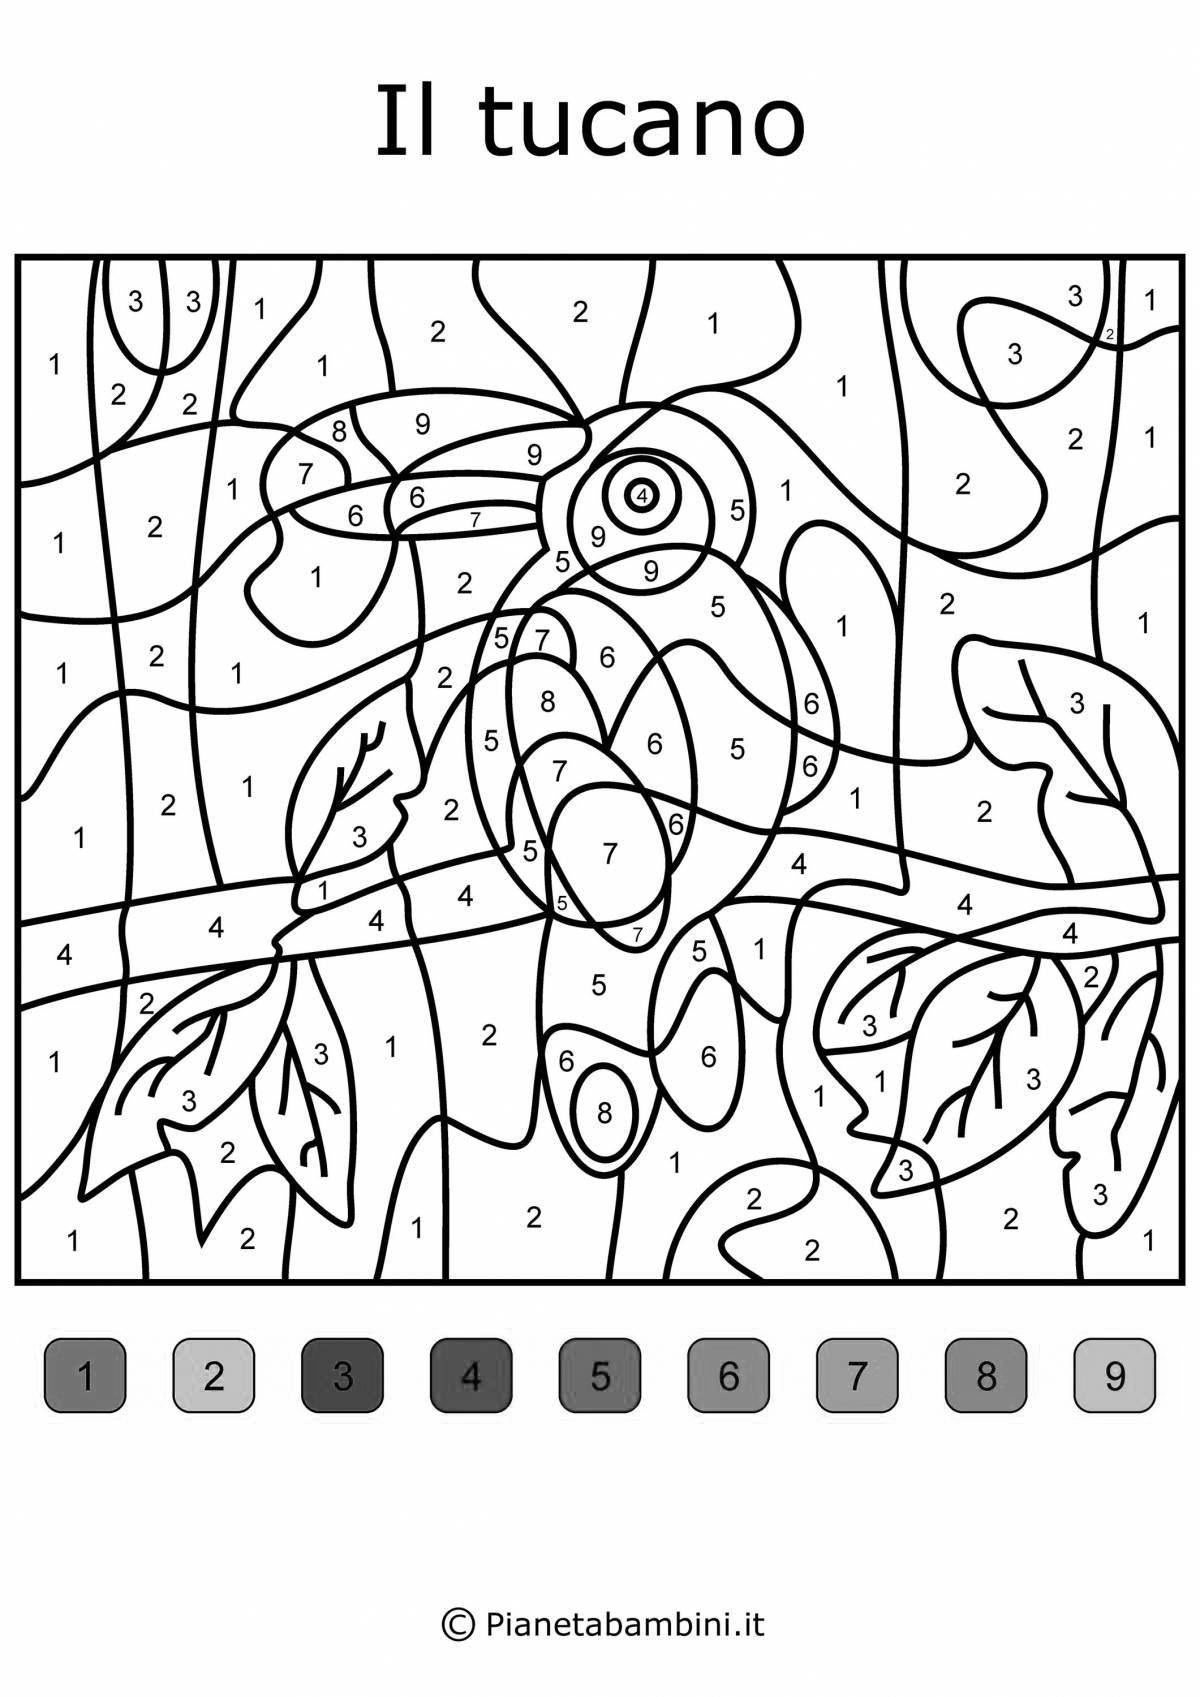 Lovely heart number game coloring game